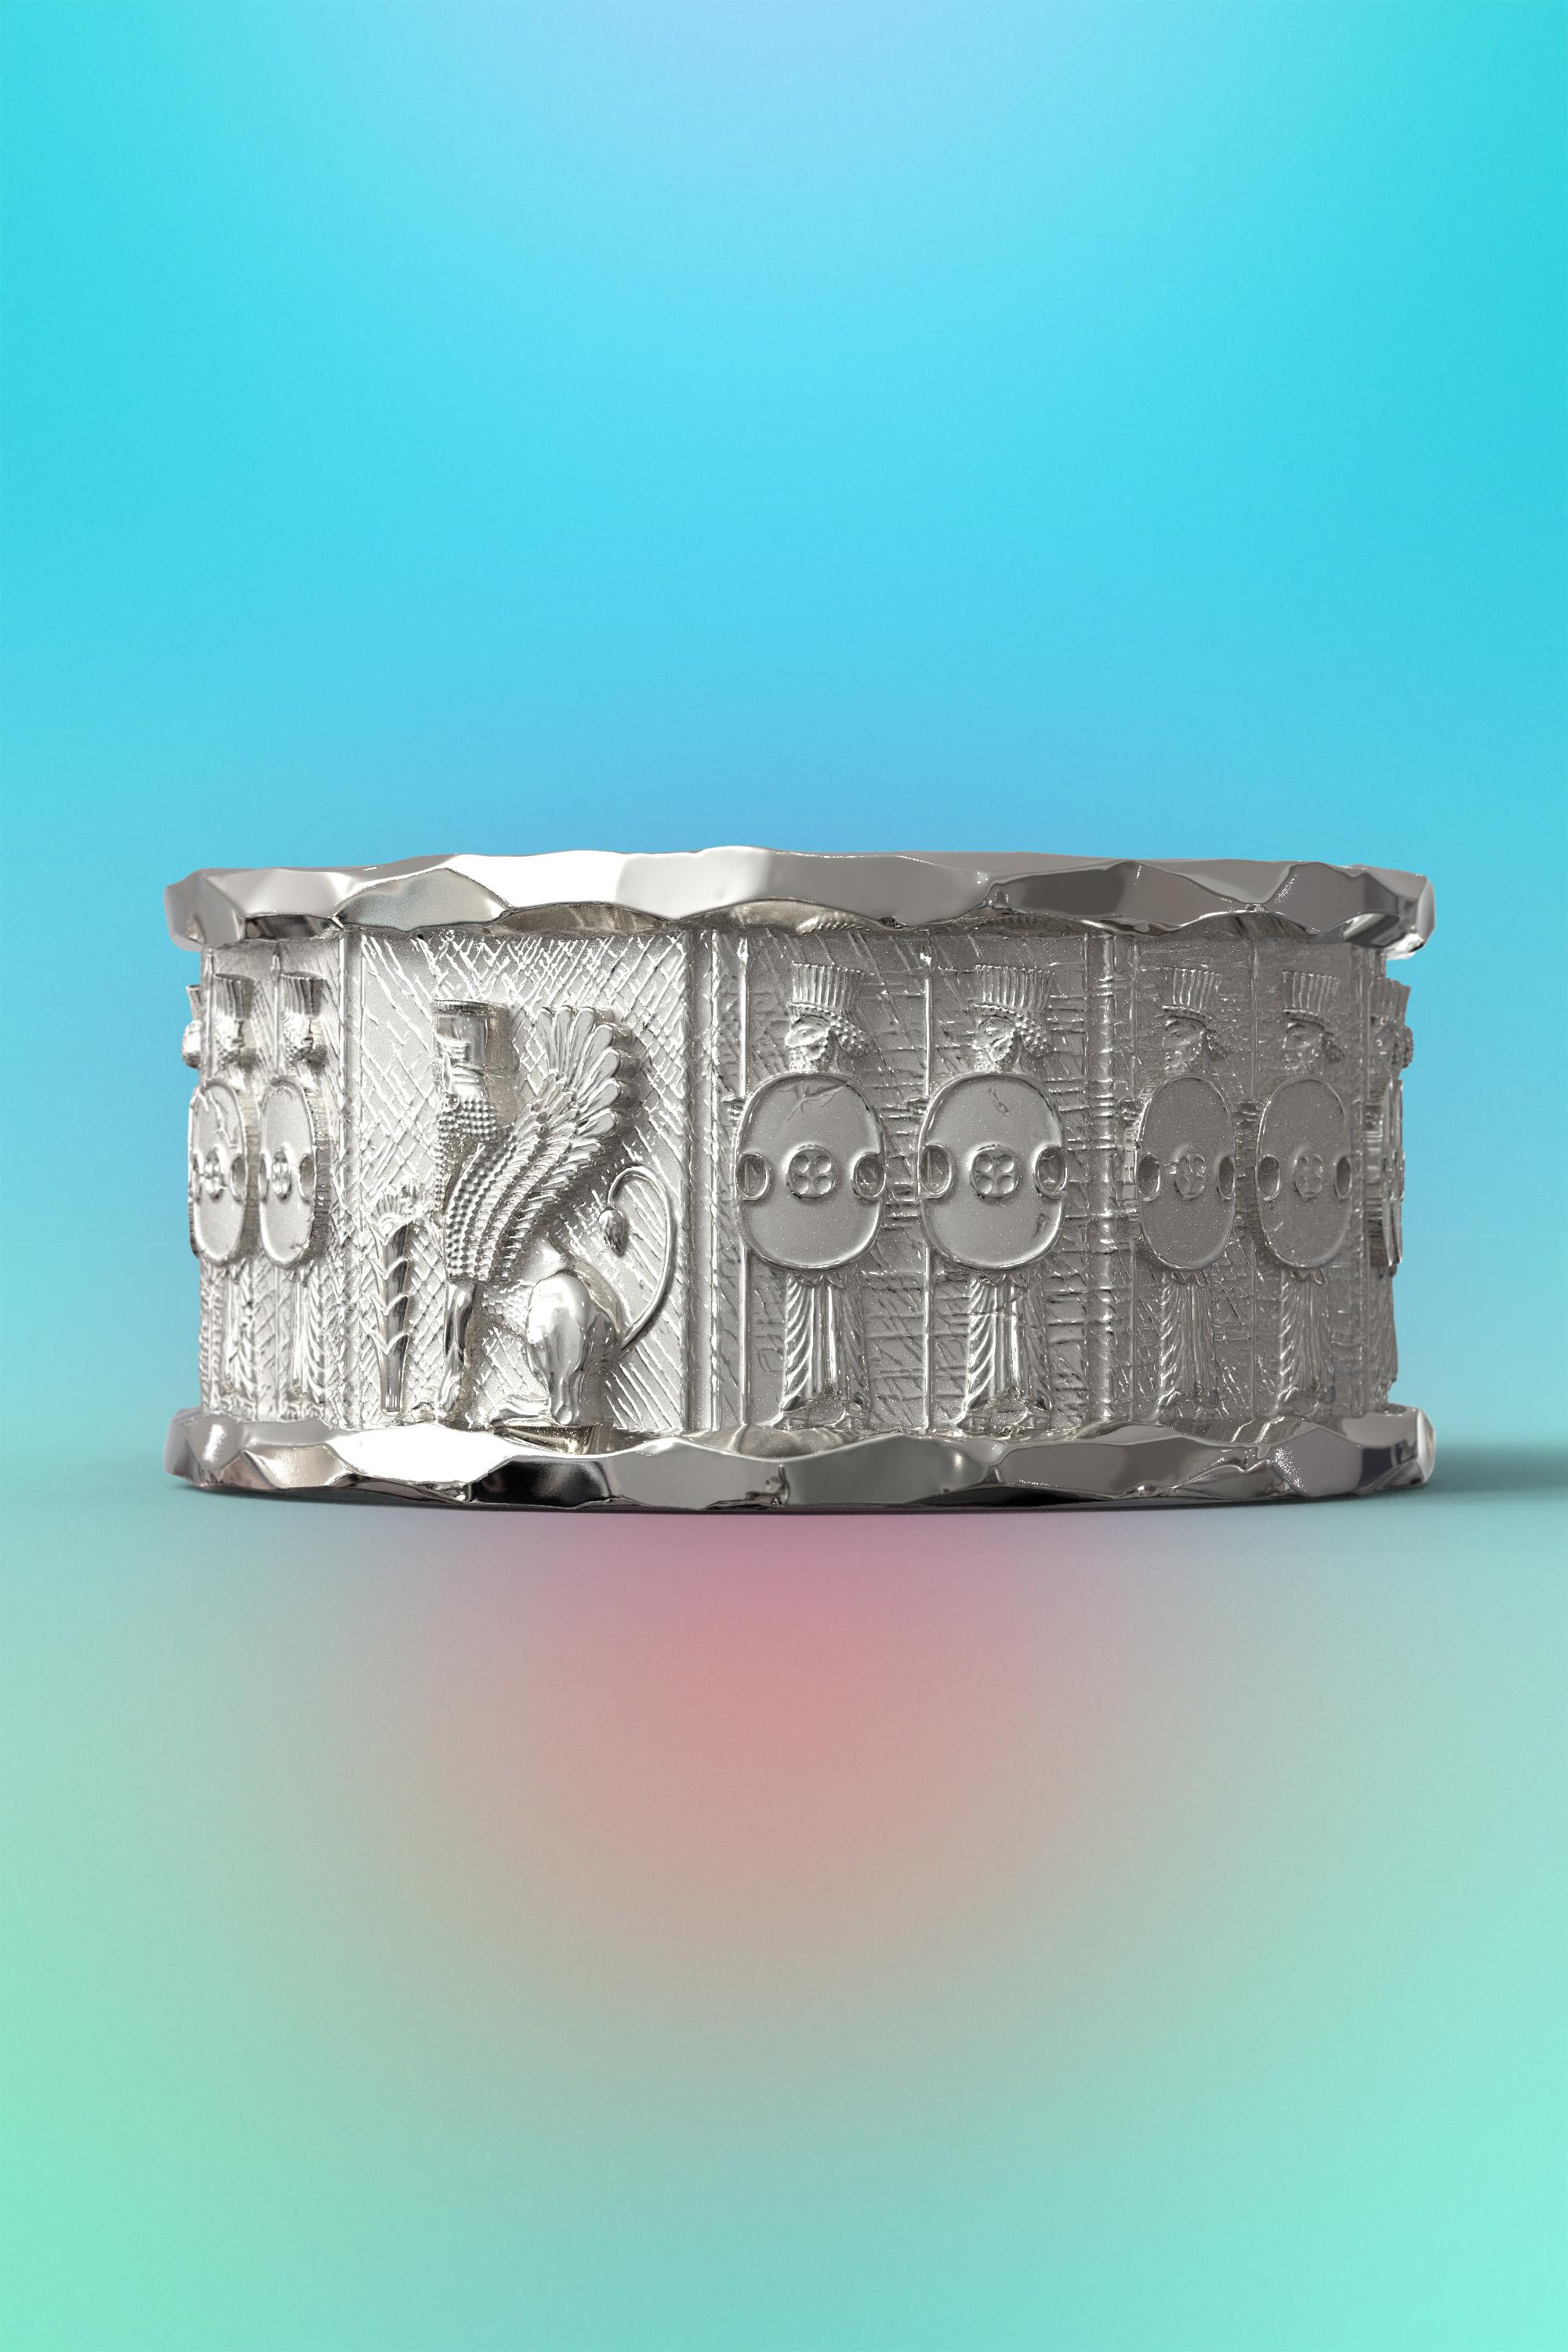 For Sale:  Italian 14k Gold Ring with Temple of Persepolis Bas-Reliefs, Persian Style Ring  10